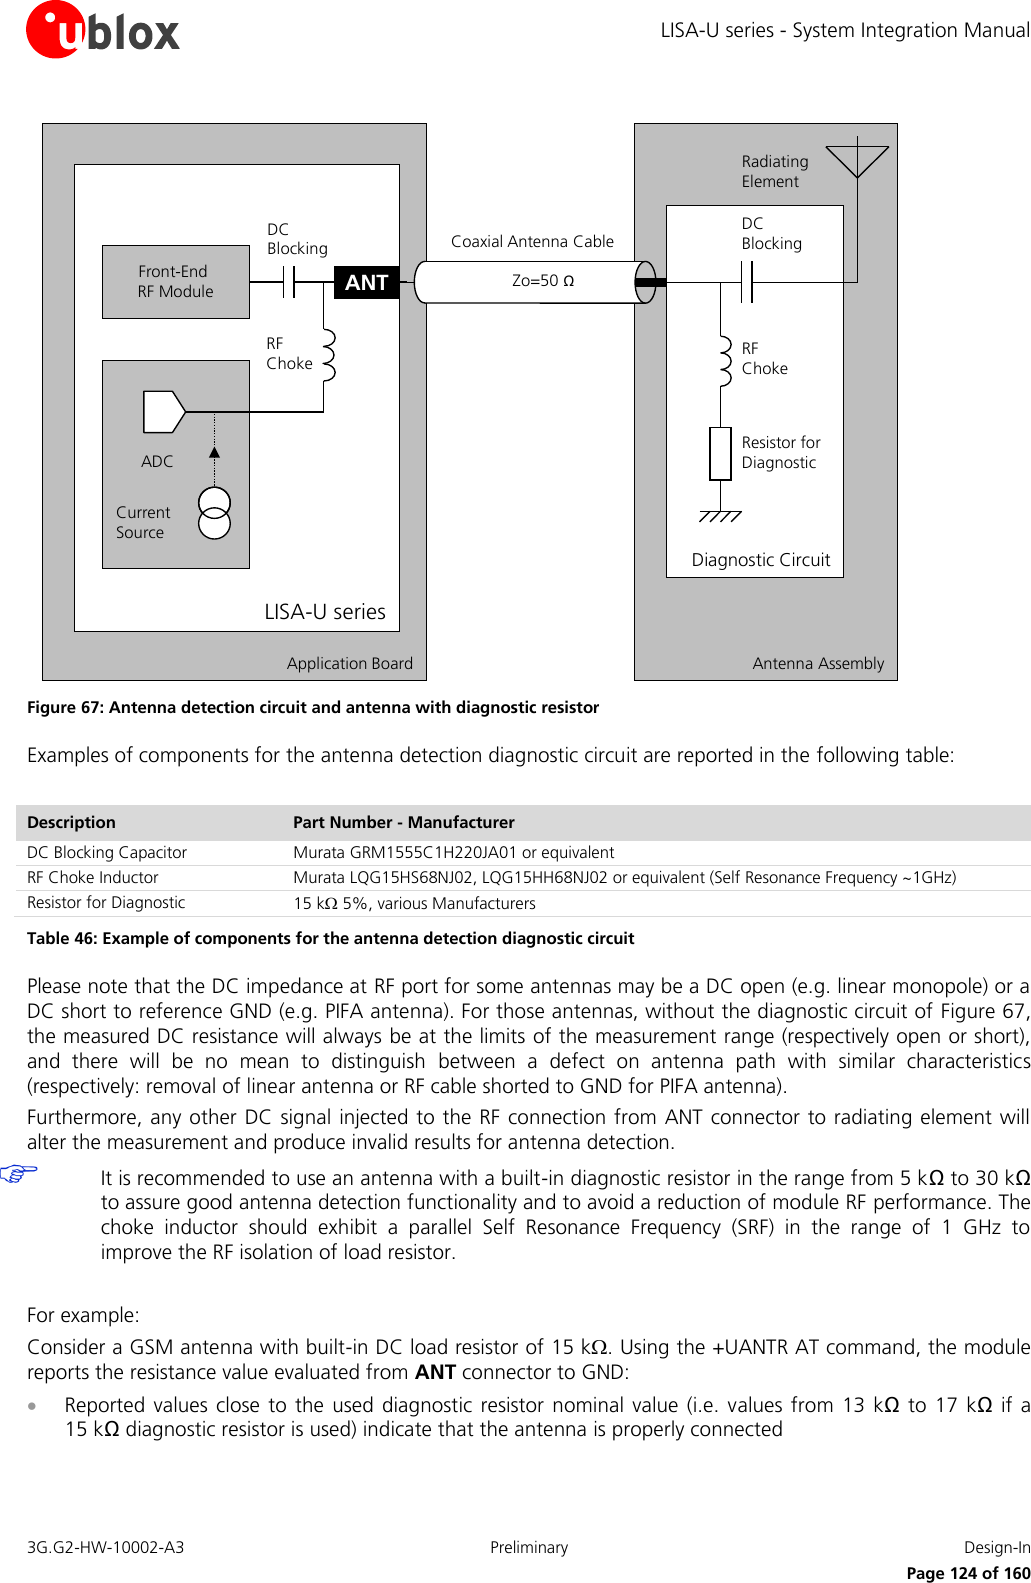 LISA-U series - System Integration Manual 3G.G2-HW-10002-A3  Preliminary  Design-In      Page 124 of 160 Application Board Antenna AssemblyDiagnostic CircuitLISA-U seriesADCCurrent SourceRF ChokeDC BlockingFront-End RF ModuleRF ChokeDC BlockingRadiating ElementZo=50 ΩResistor for DiagnosticCoaxial Antenna CableANT Figure 67: Antenna detection circuit and antenna with diagnostic resistor Examples of components for the antenna detection diagnostic circuit are reported in the following table:  Description Part Number - Manufacturer DC Blocking Capacitor  Murata GRM1555C1H220JA01 or equivalent RF Choke Inductor Murata LQG15HS68NJ02, LQG15HH68NJ02 or equivalent (Self Resonance Frequency ~1GHz) Resistor for Diagnostic  15 k 5%, various Manufacturers Table 46: Example of components for the antenna detection diagnostic circuit Please note that the DC impedance at RF port for some antennas may be a DC open (e.g. linear monopole) or a DC short to reference GND (e.g. PIFA antenna). For those antennas, without the diagnostic circuit of Figure 67, the measured DC resistance will always be at the limits of the measurement range (respectively open or short), and  there  will  be  no  mean  to  distinguish  between  a  defect  on  antenna  path  with  similar  characteristics (respectively: removal of linear antenna or RF cable shorted to GND for PIFA antenna). Furthermore, any other DC  signal injected to the RF connection from ANT connector to radiating element will alter the measurement and produce invalid results for antenna detection.  It is recommended to use an antenna with a built-in diagnostic resistor in the range from 5 kΩ to 30 kΩ to assure good antenna detection functionality and to avoid a reduction of module RF performance. The choke  inductor  should  exhibit  a  parallel  Self  Resonance  Frequency  (SRF)  in  the  range  of  1  GHz  to improve the RF isolation of load resistor.  For example: Consider a GSM antenna with built-in DC load resistor of 15 k. Using the +UANTR AT command, the module reports the resistance value evaluated from ANT connector to GND:  Reported values close  to the  used diagnostic  resistor  nominal value  (i.e. values from  13 kΩ  to 17  kΩ if  a 15 kΩ diagnostic resistor is used) indicate that the antenna is properly connected 